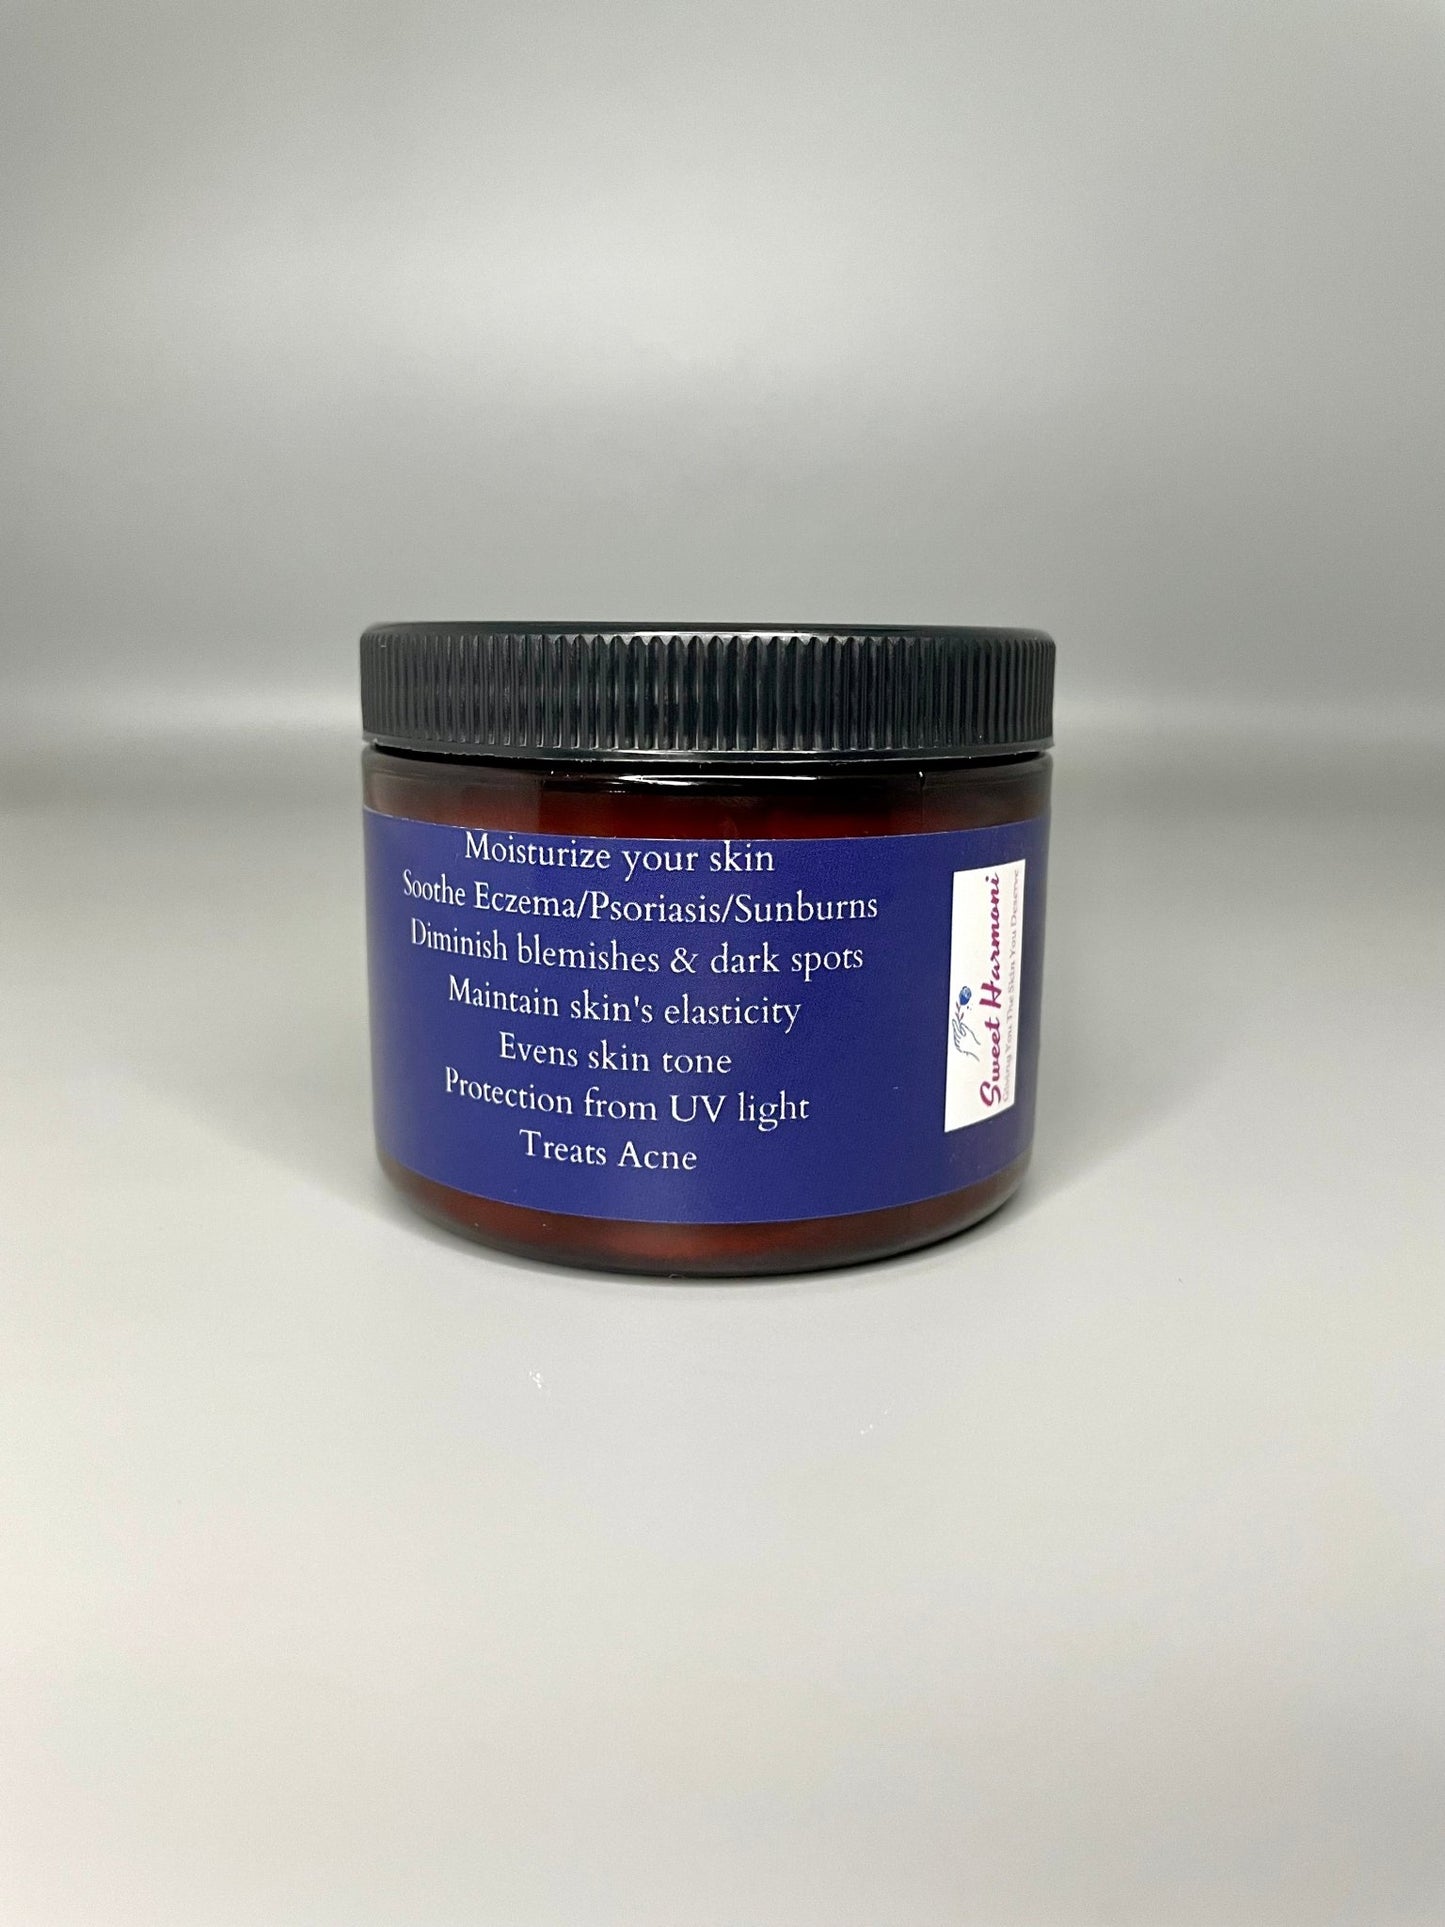 The Sophisticated Man Body Butter - Sweet Harmoni-Body Butter-Sweet Harmoni